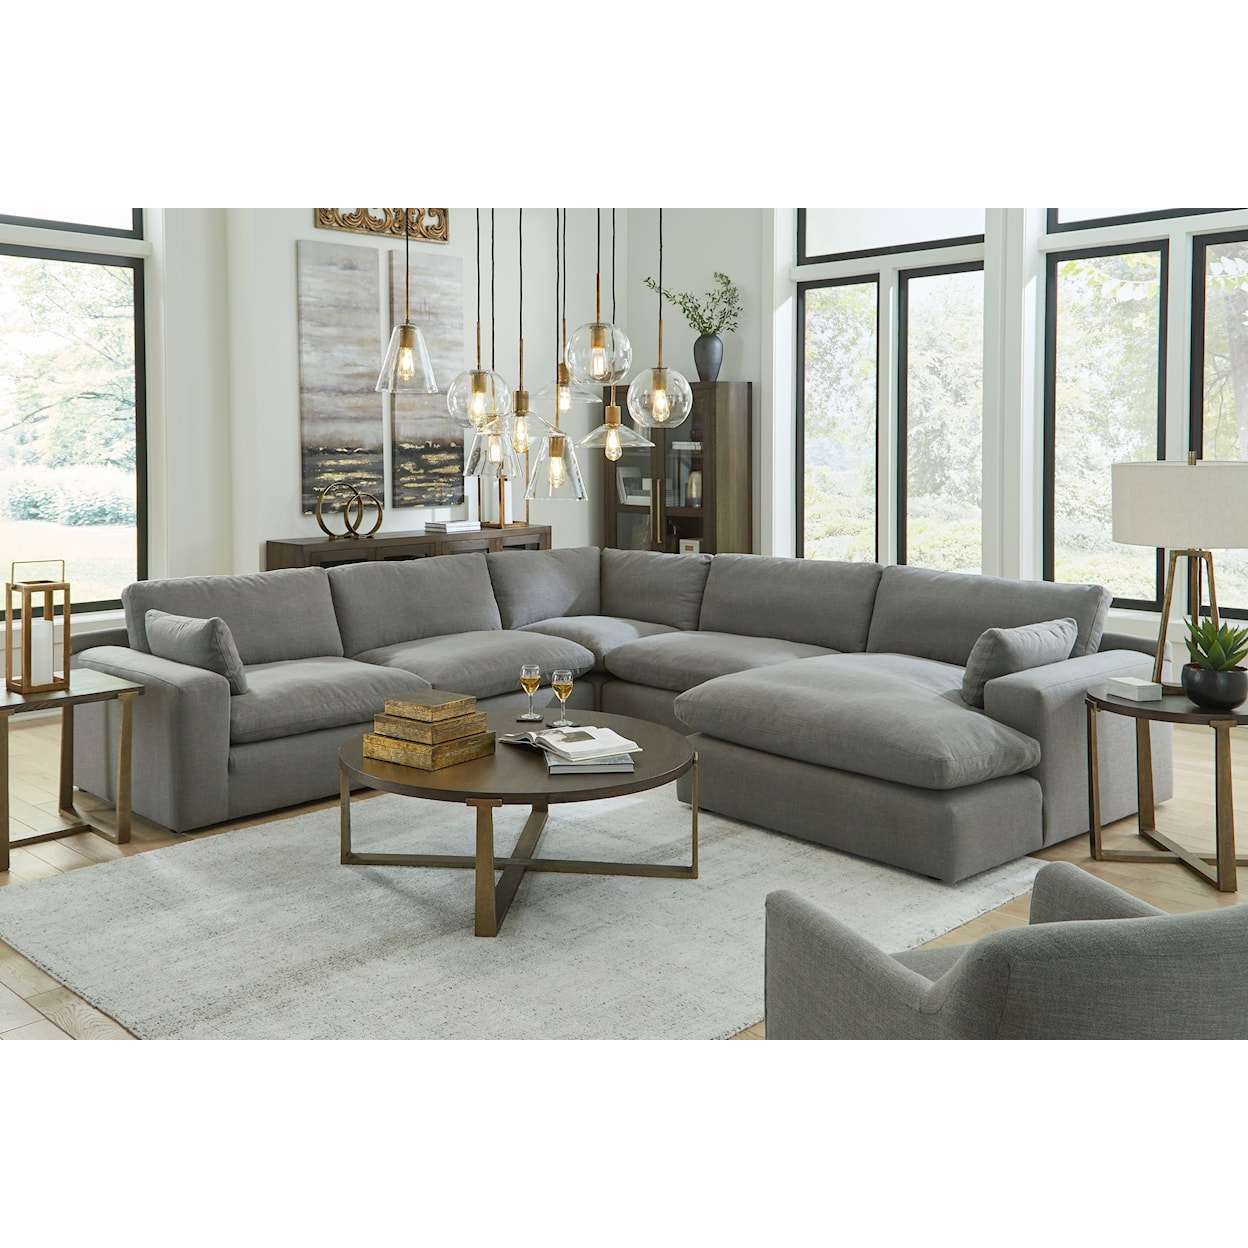 Benchcraft Elyza 5-Piece Modular Sectional with Chaise